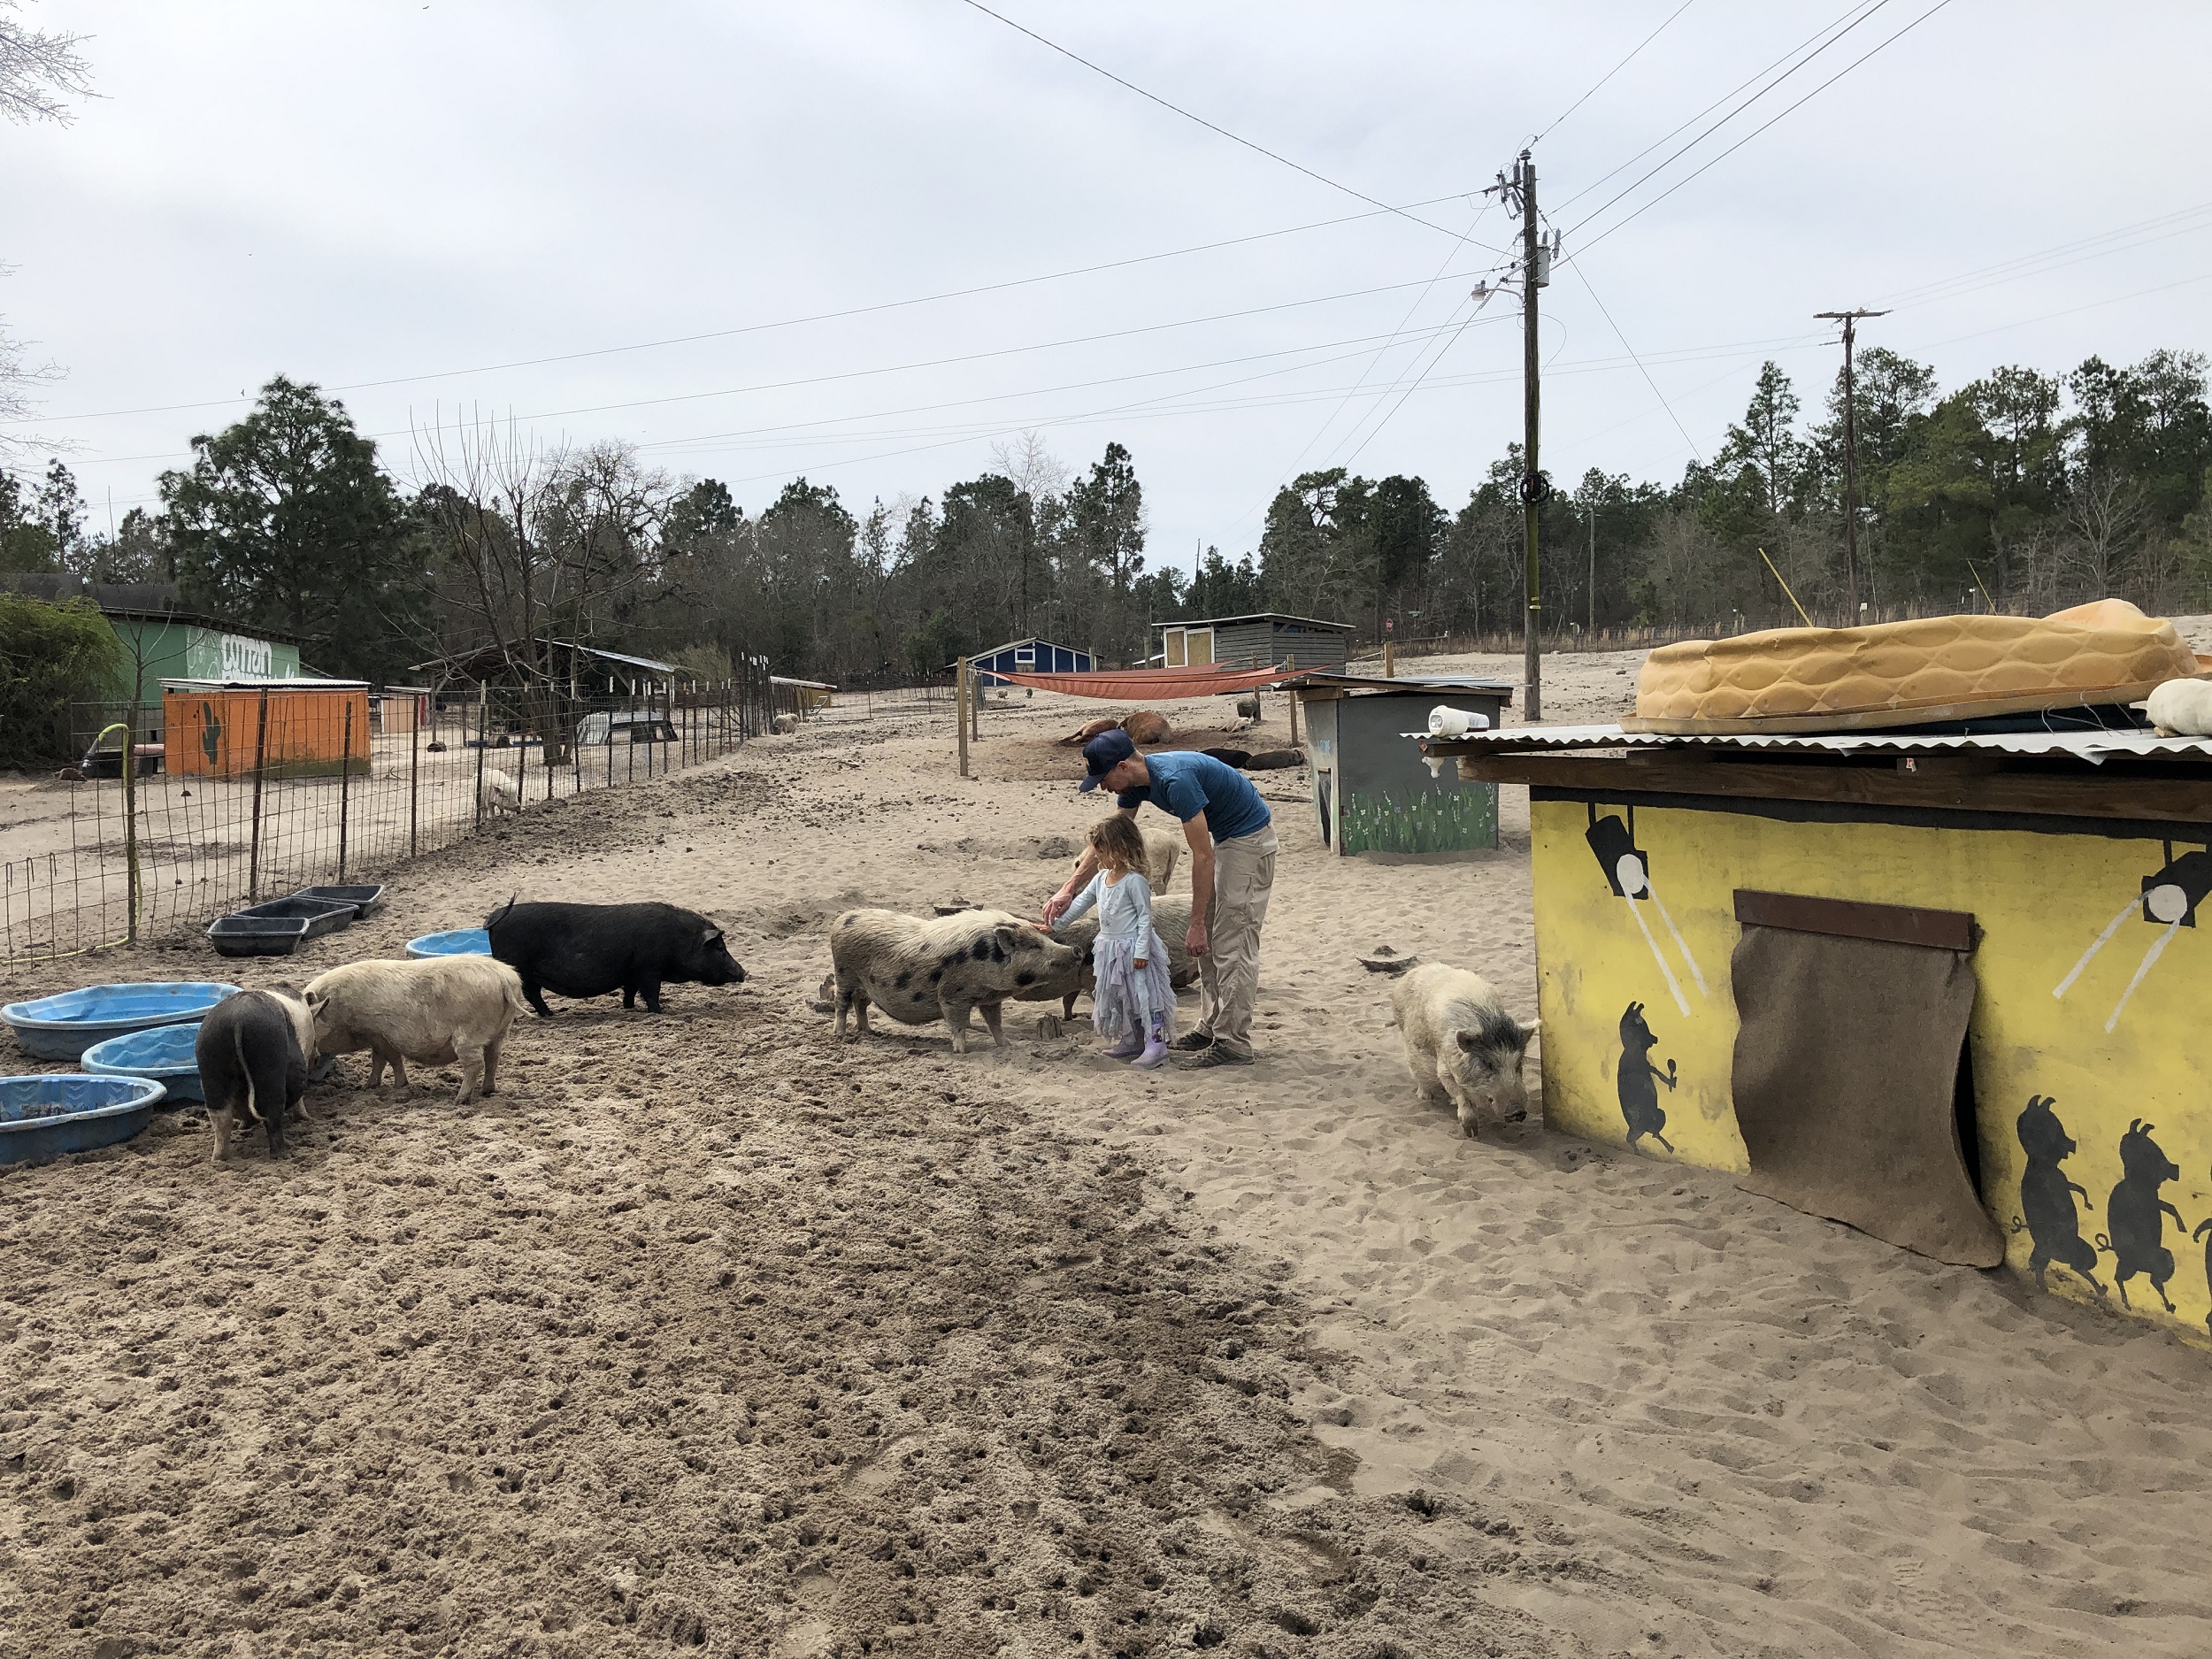 Family petting pigs at Cotton Branch Farm Sanctuary in South Carolina